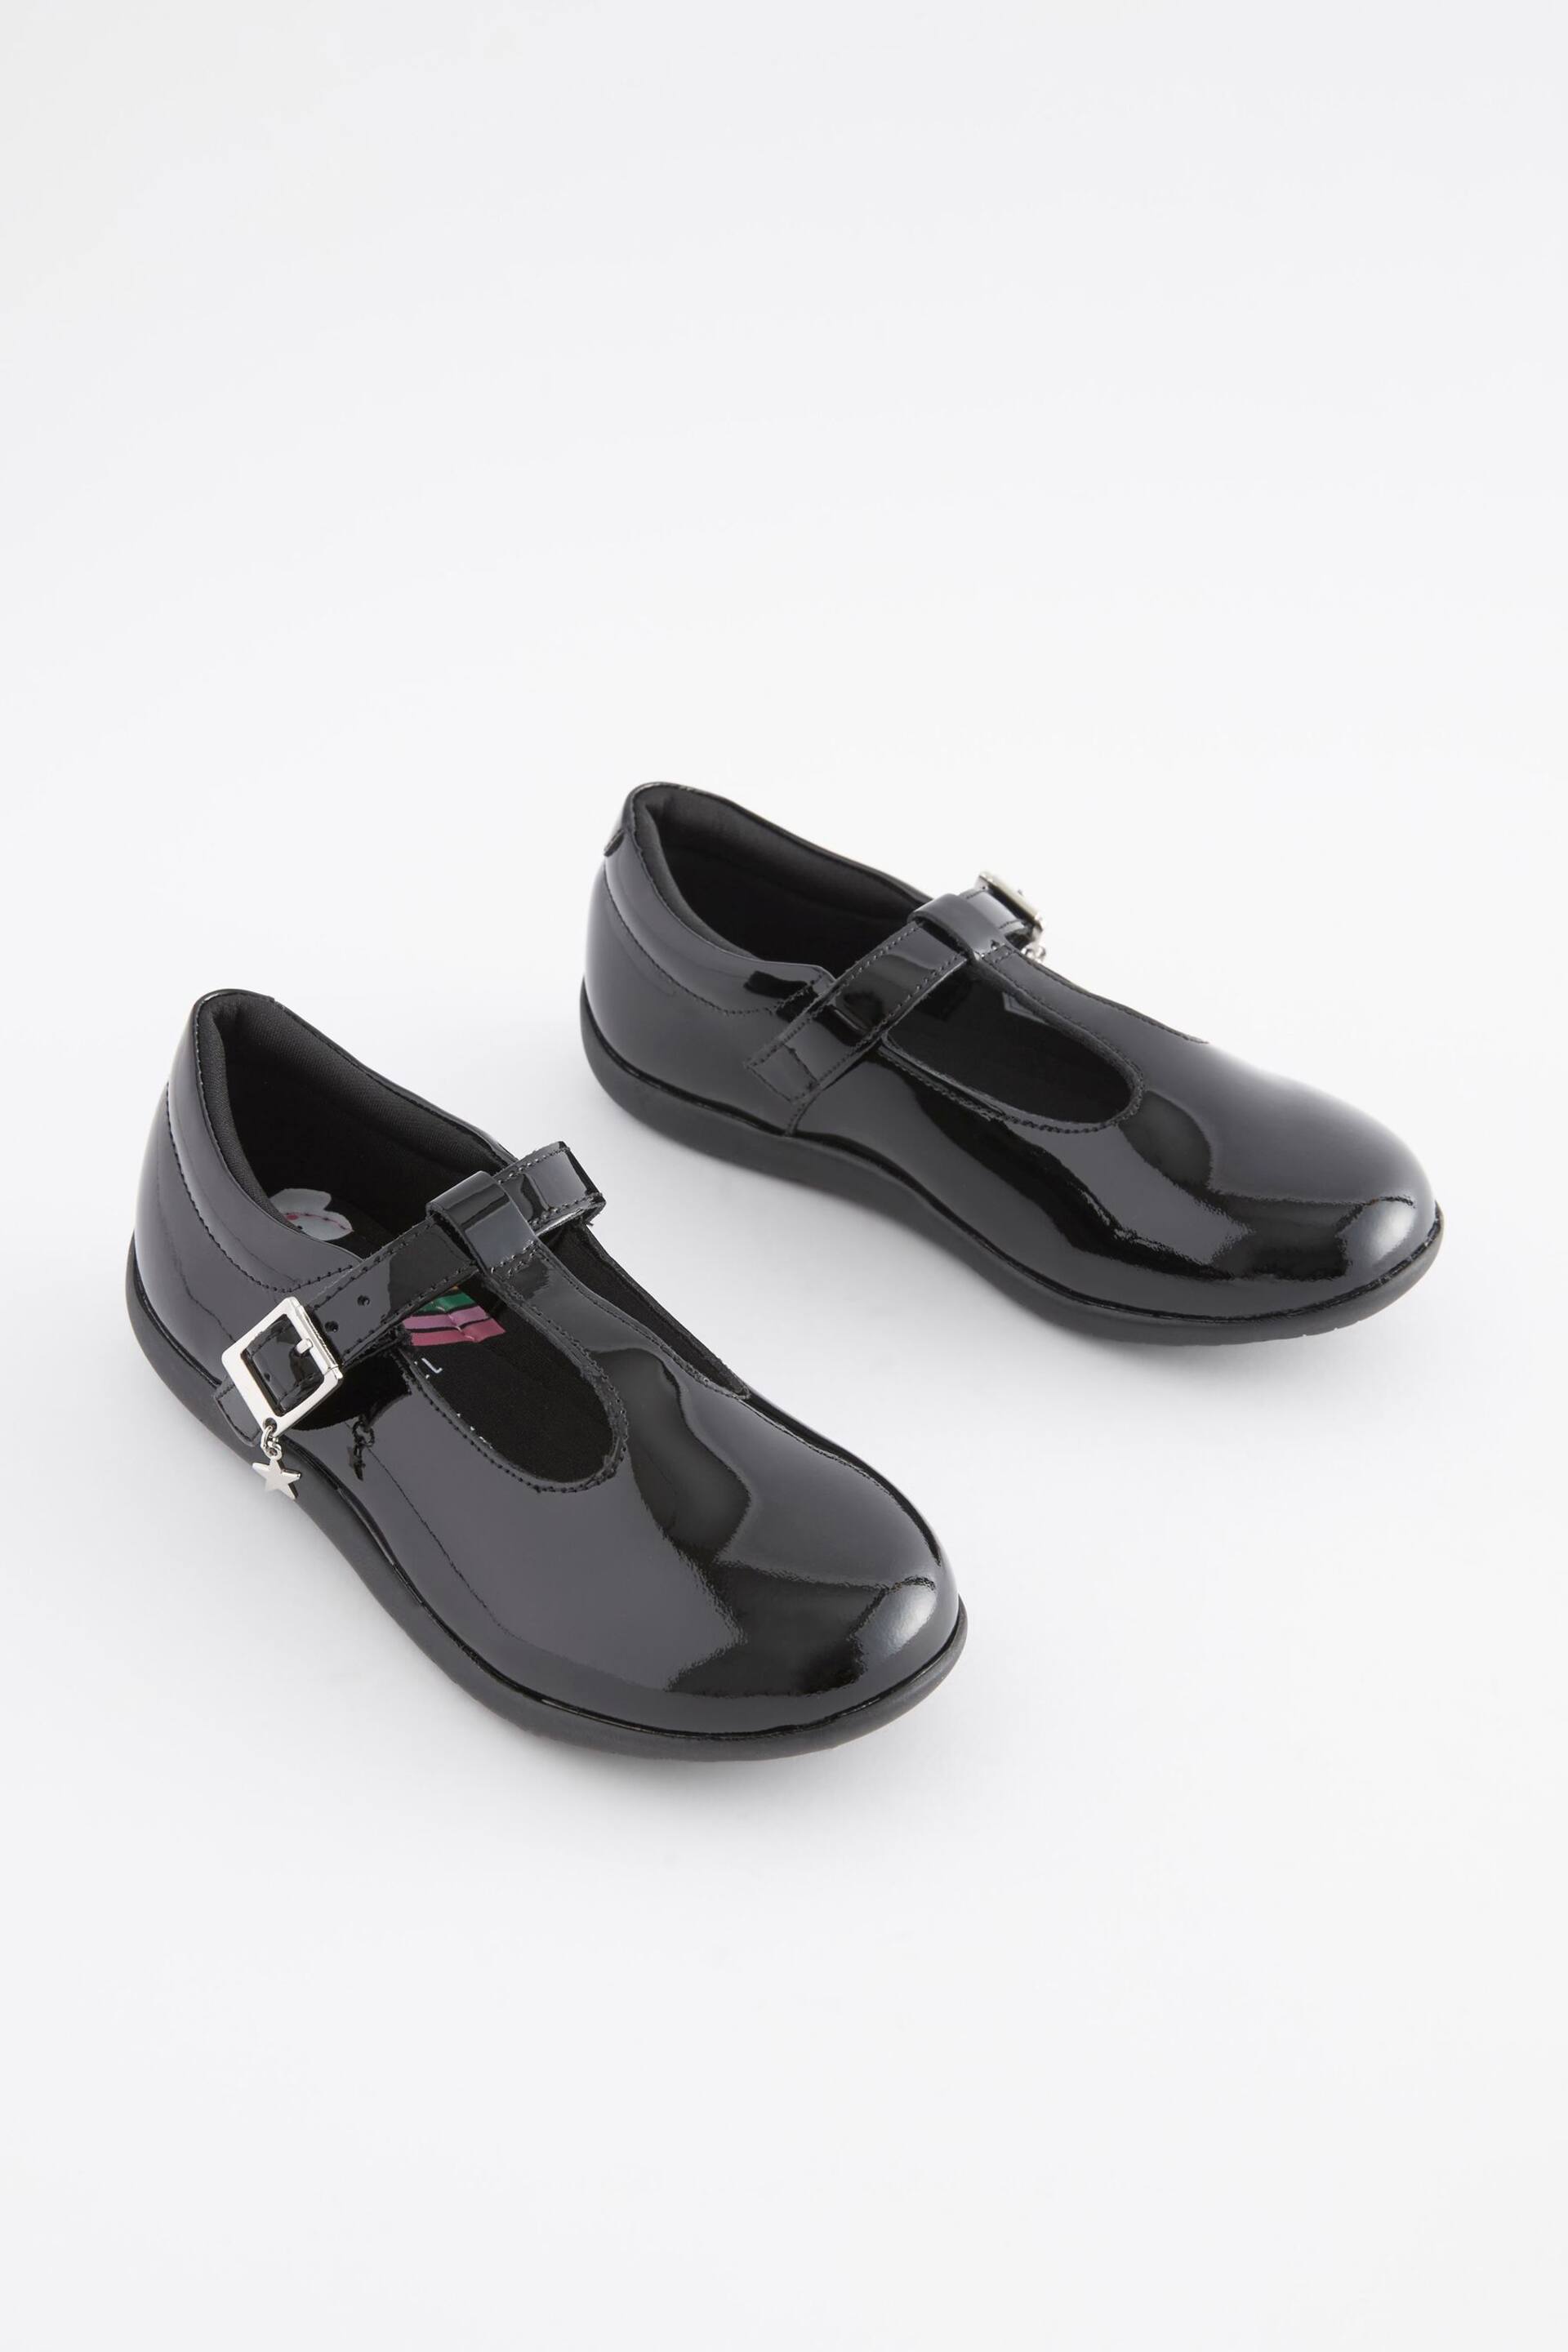 Black Patent School Leather T-Bar Shoes - Image 1 of 5